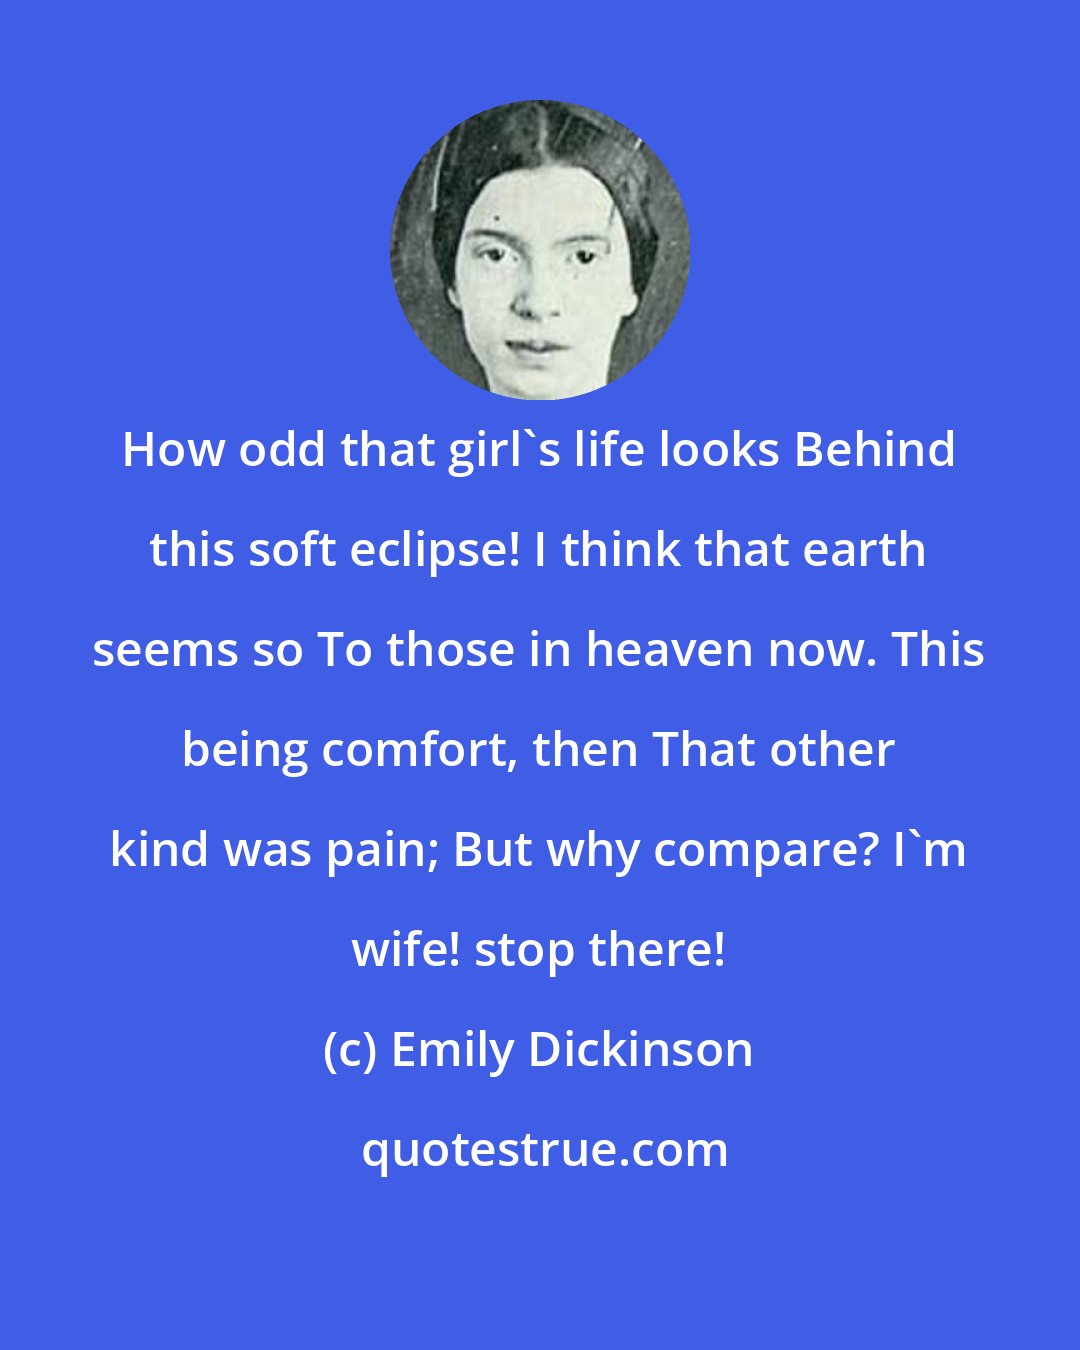 Emily Dickinson: How odd that girl's life looks Behind this soft eclipse! I think that earth seems so To those in heaven now. This being comfort, then That other kind was pain; But why compare? I'm wife! stop there!